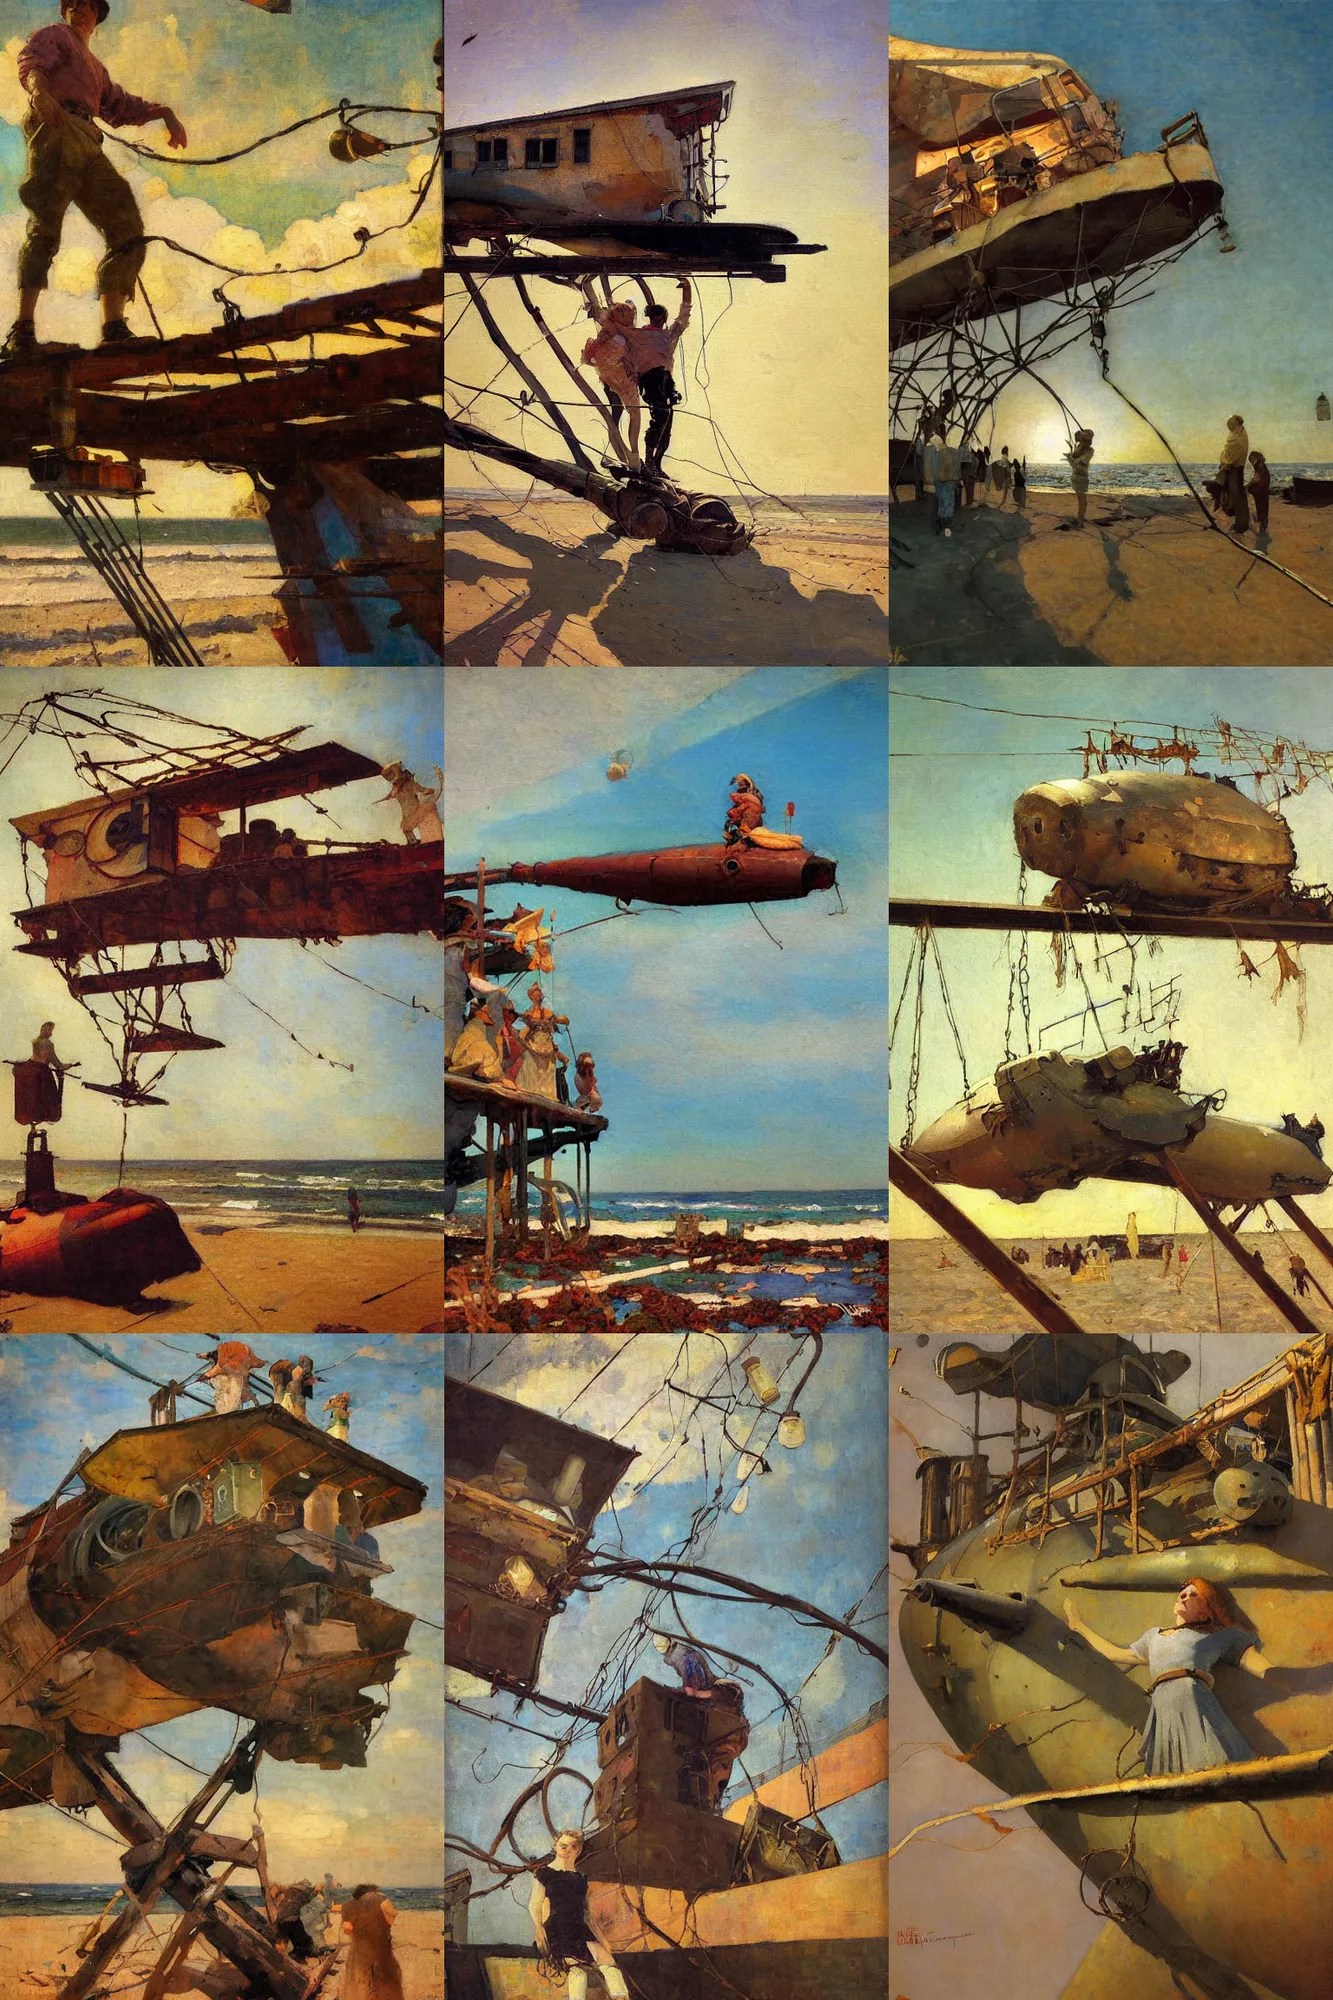 Prompt: looking up, painting by dean cornwell, ilya repin, nc wyeth painting, ultra wide, vanishing point, 3 d perspective, beached submarine, award winning, up close, climbing, beaching, rust, golden hour, junk town, lanterns, makeshift treehouse, catanary wire, lightbulb festoon lights, telephone pole